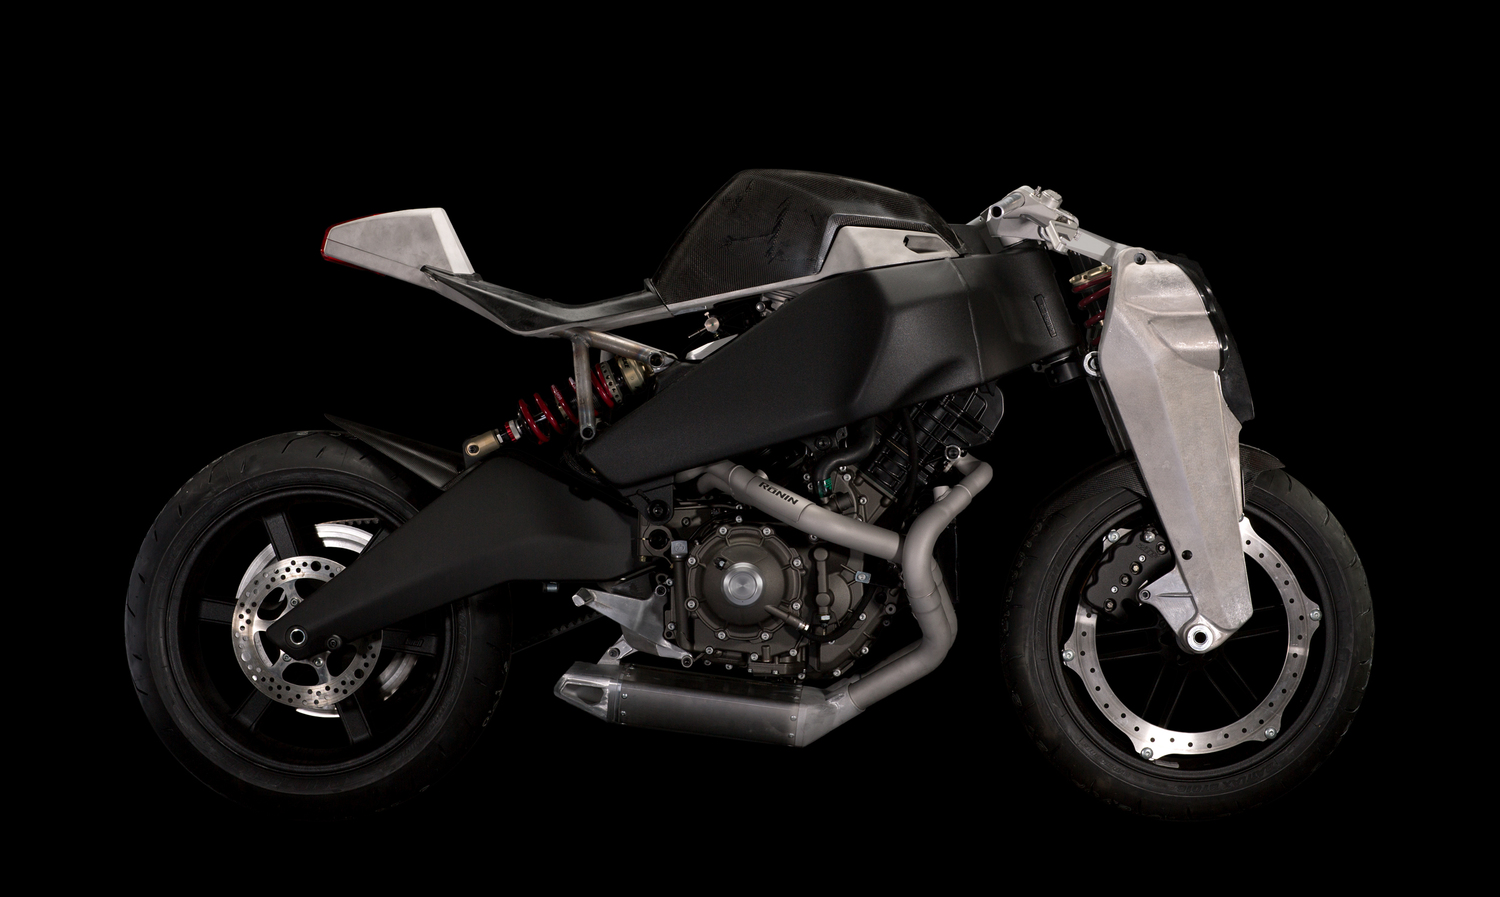 Firearm firm's Buell 1125R-based concept lives